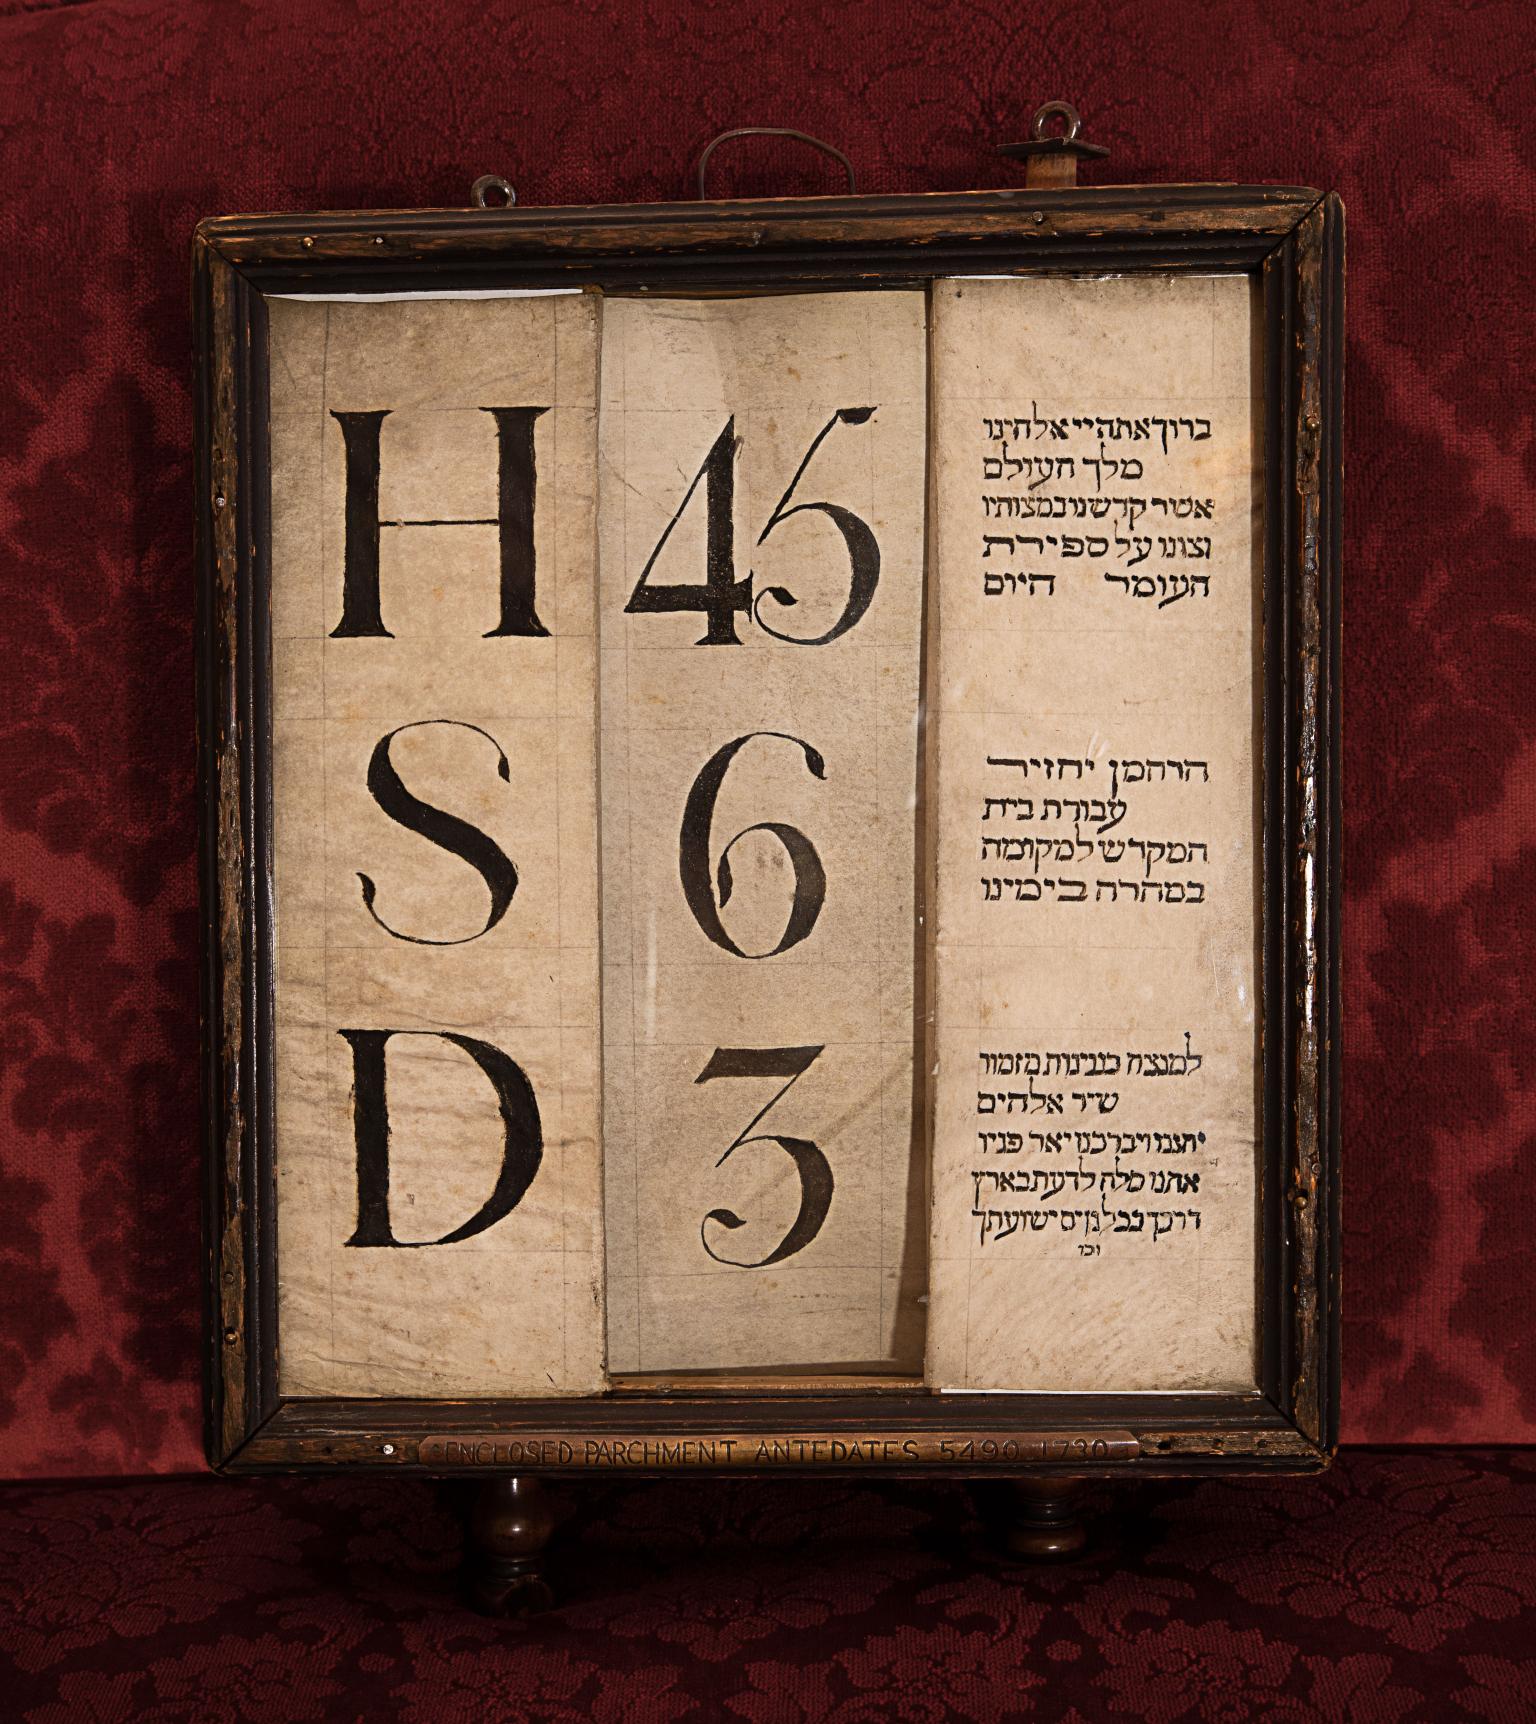 Framed piece of paper with three columns of text: single letters in left column, numbers in middle column, and Hebrew text in right column. 